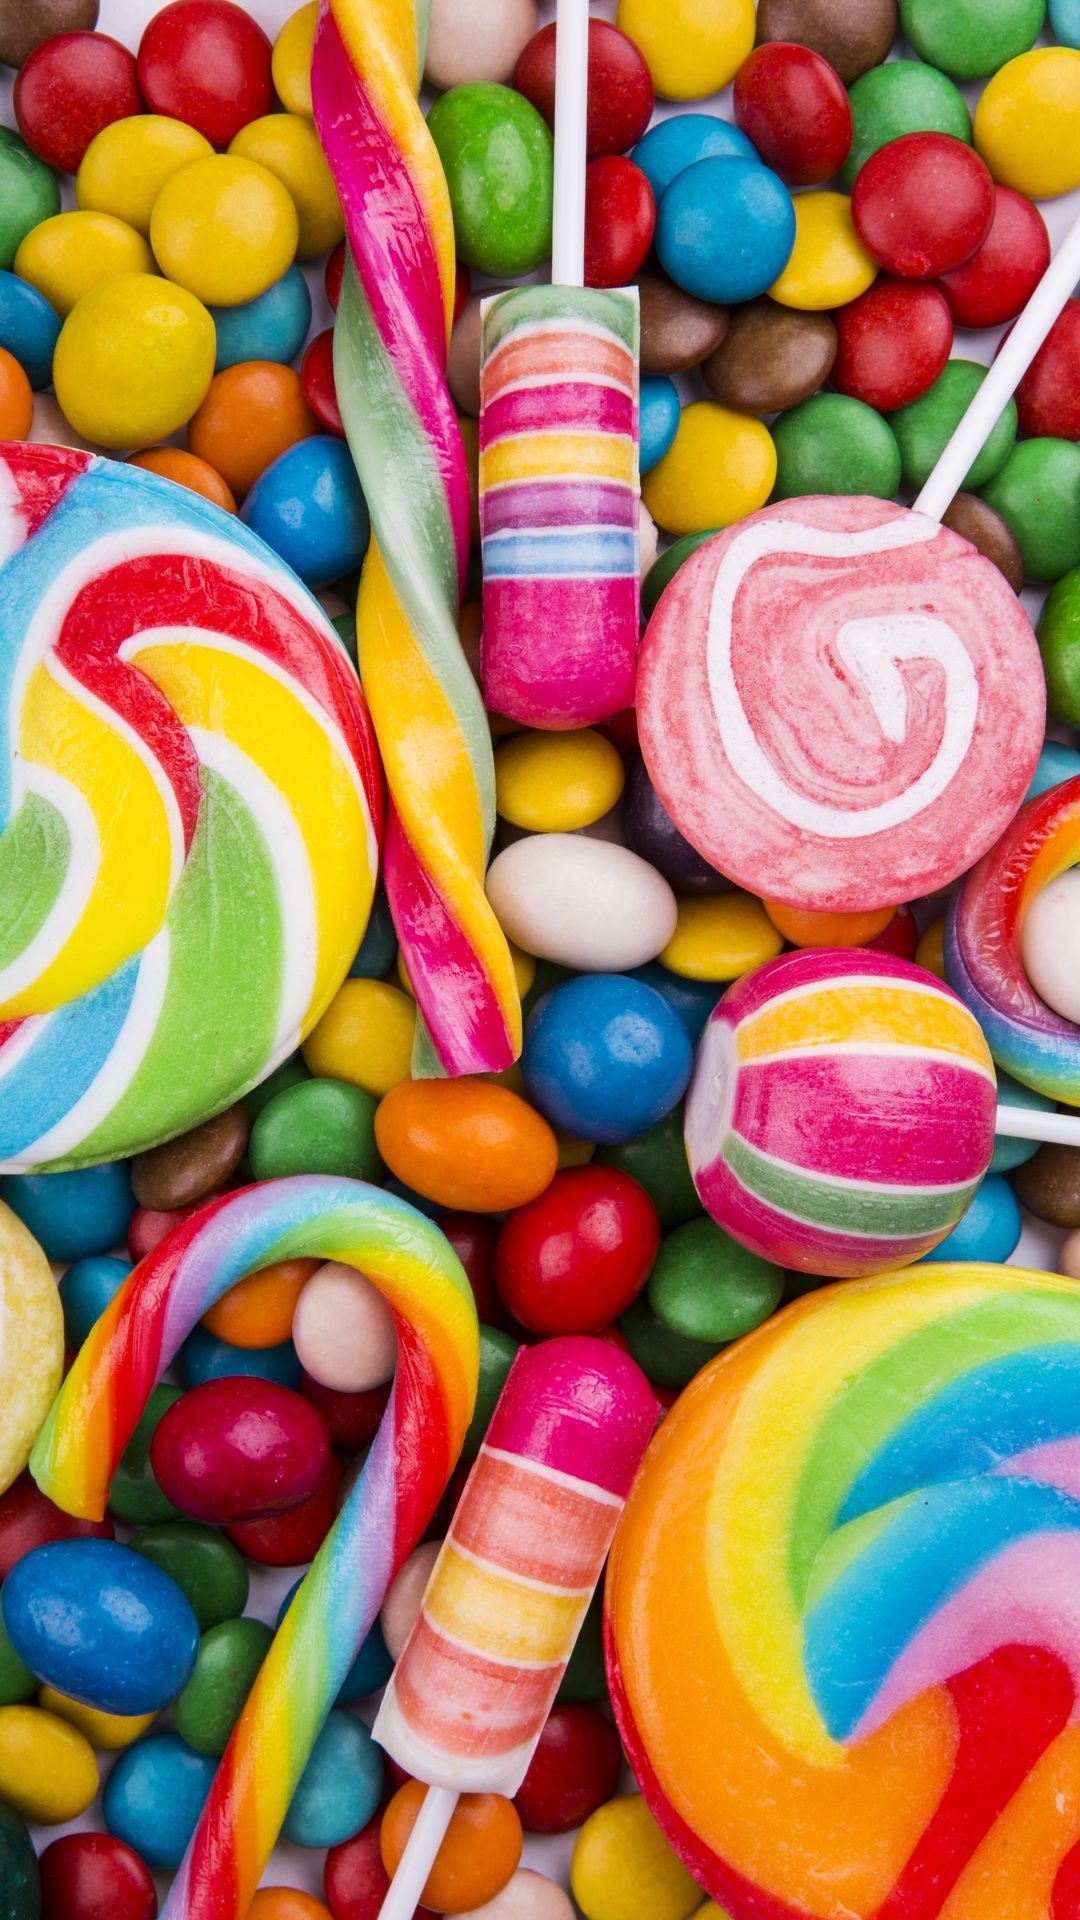 Candy Om Nom Galaxy S5 Wallpaper Colorful